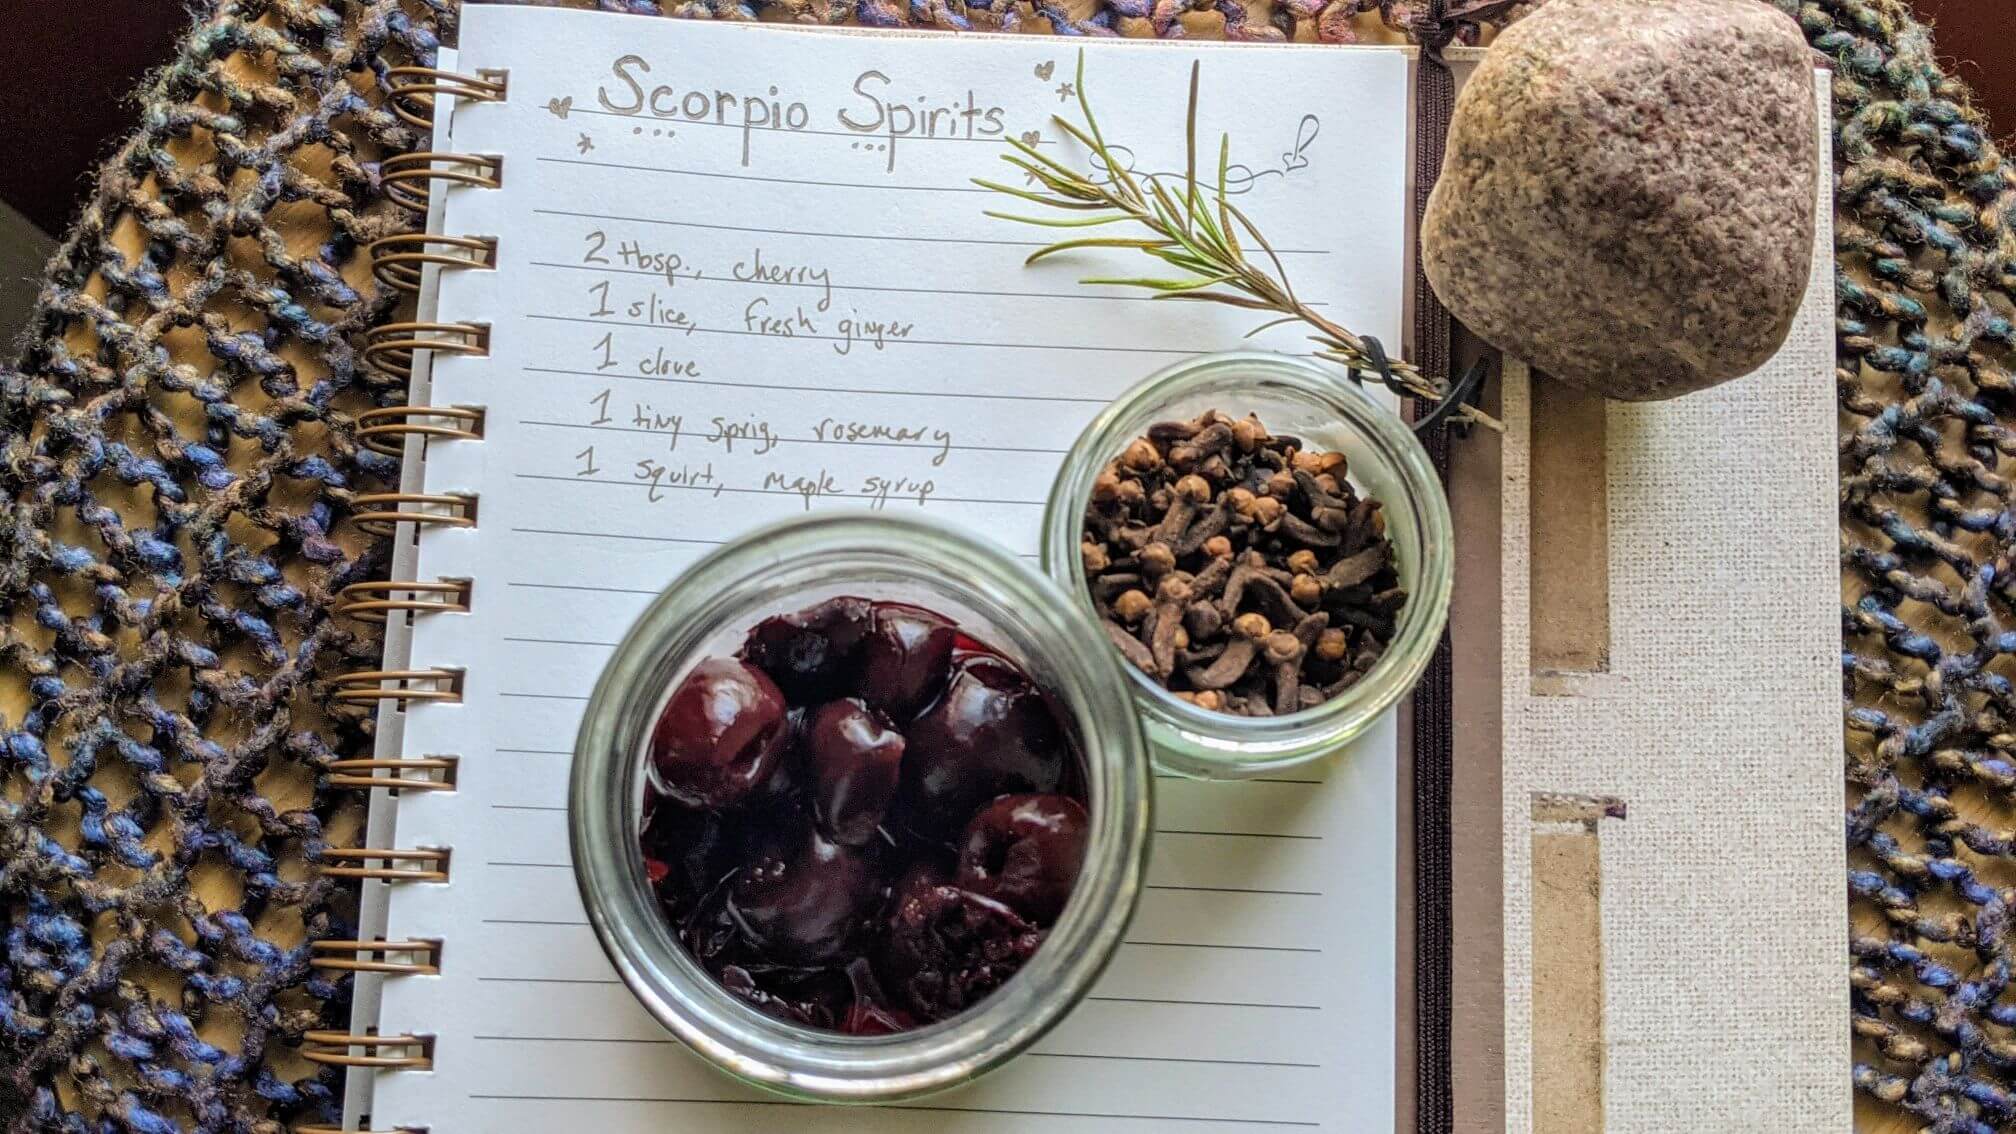 The handwritten recipe is displayed with an open jar for thawed, frozen cherries, whole cloves, and a sprig of fresh rosemary.